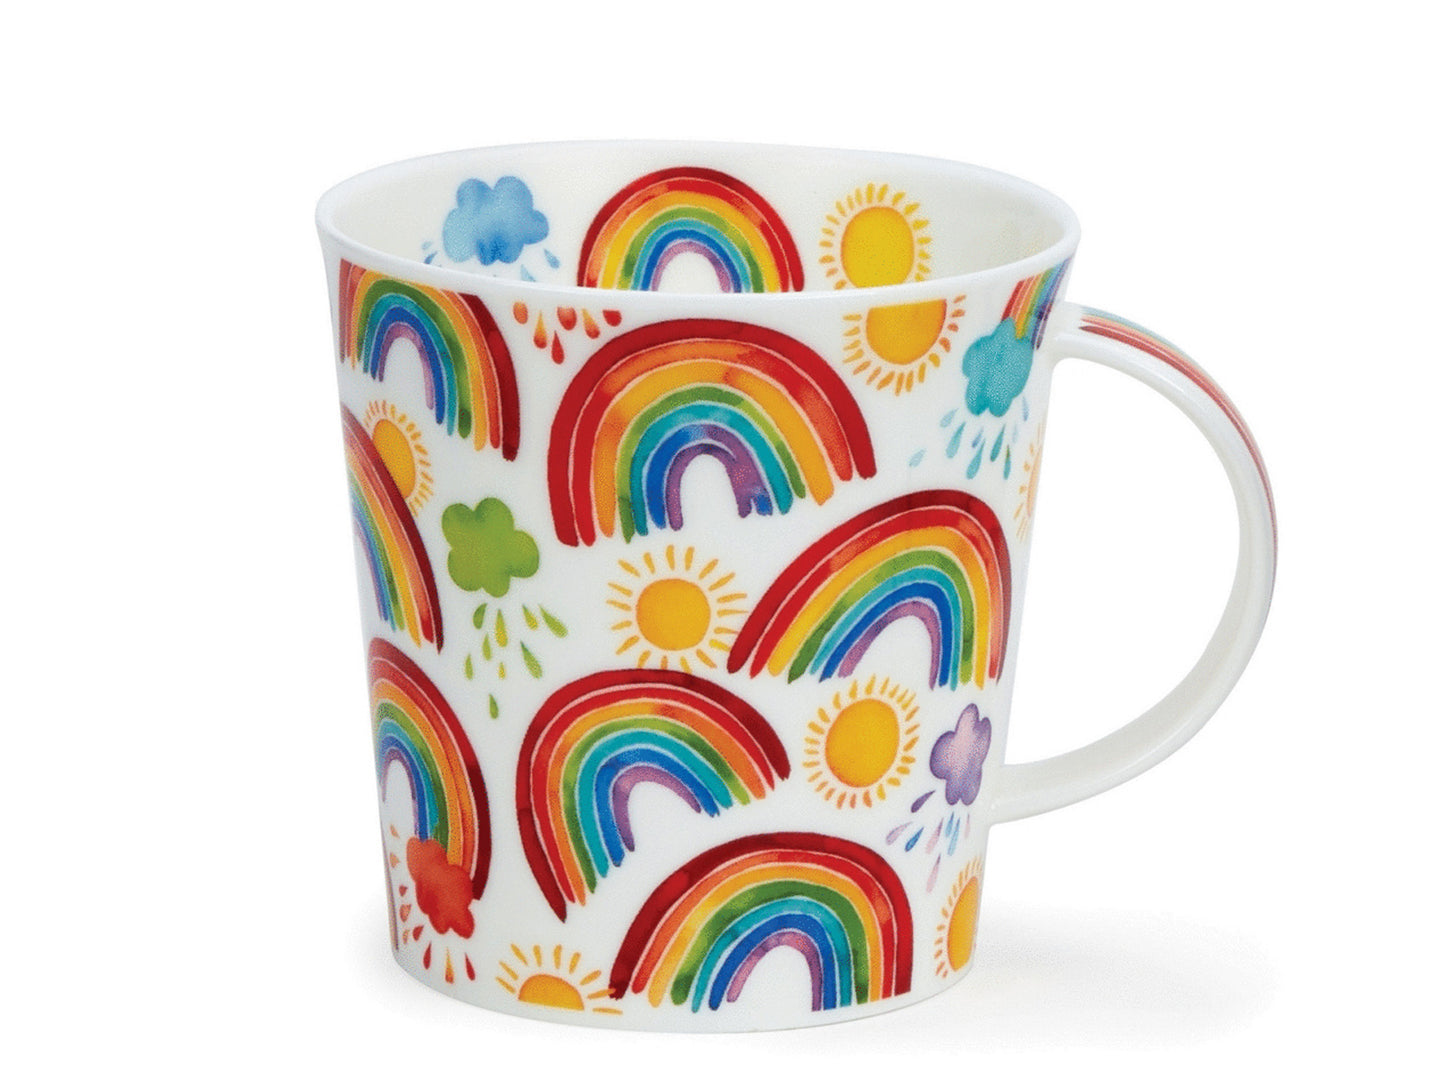 A white fine bone china mug showcasing an assortment of gracefully curved rainbows, adorned with vibrant rain clouds and scattered sun motifs. Inside the fluted rim is a harmonious trio of a cloud, sun and rainbow, with a long rainbow extending down the mug handle.